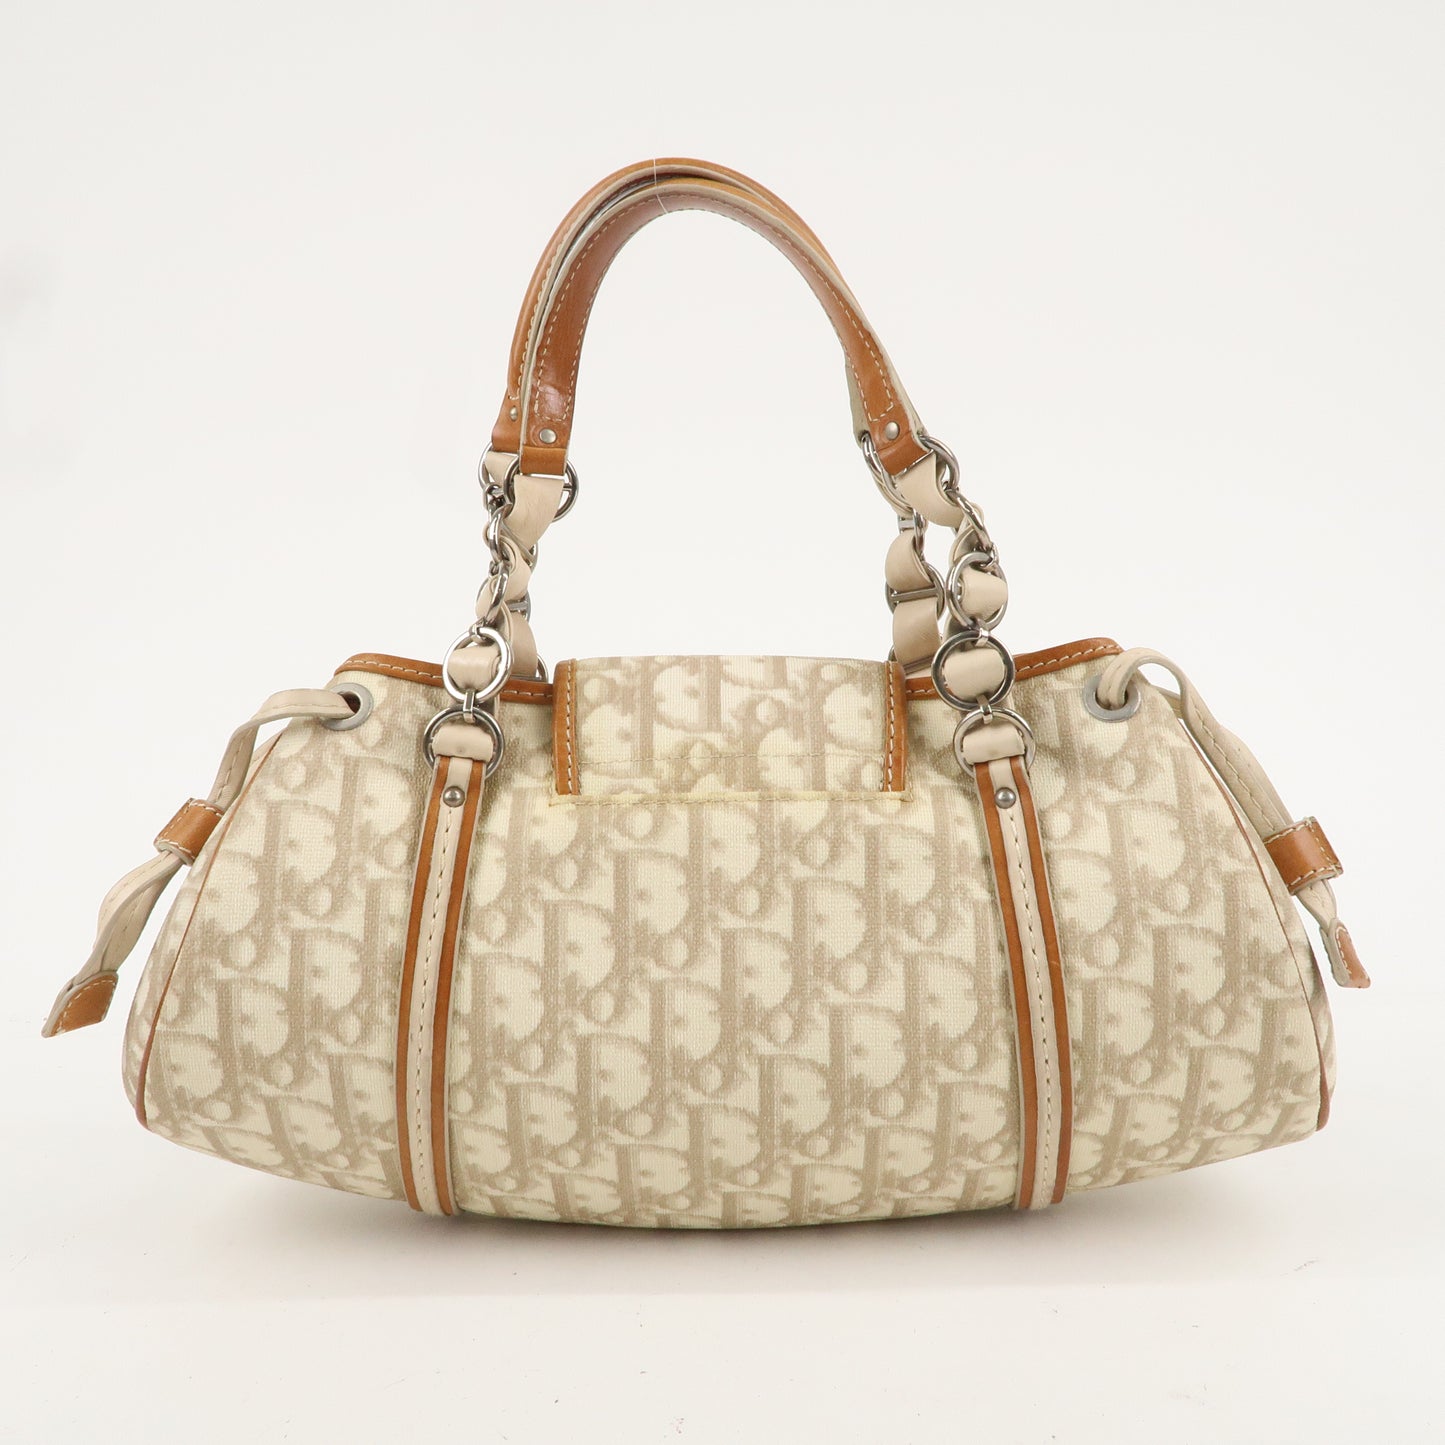 Christian Dior Trotter PVC Leather Hand Bag Beige Brown